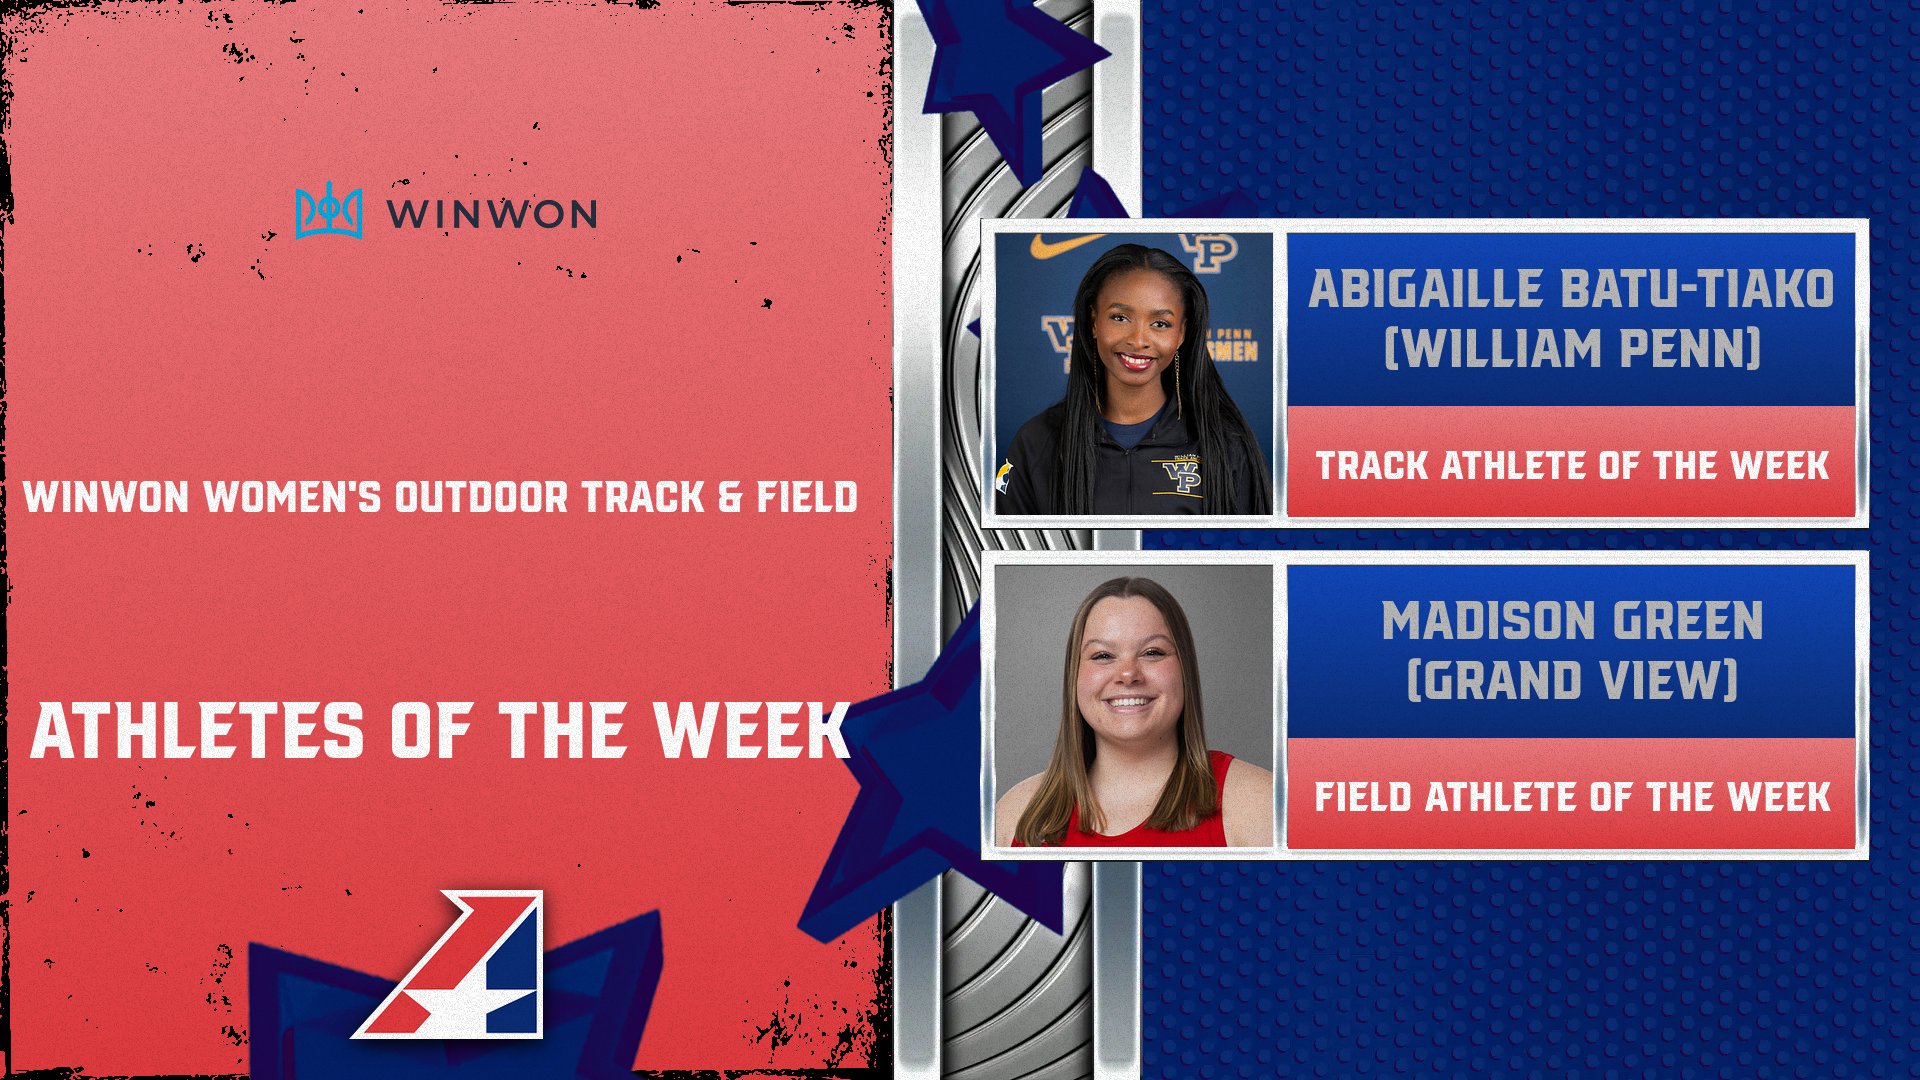 WinWon Women’s Outdoor Track & Field Athletes of the Week Announced